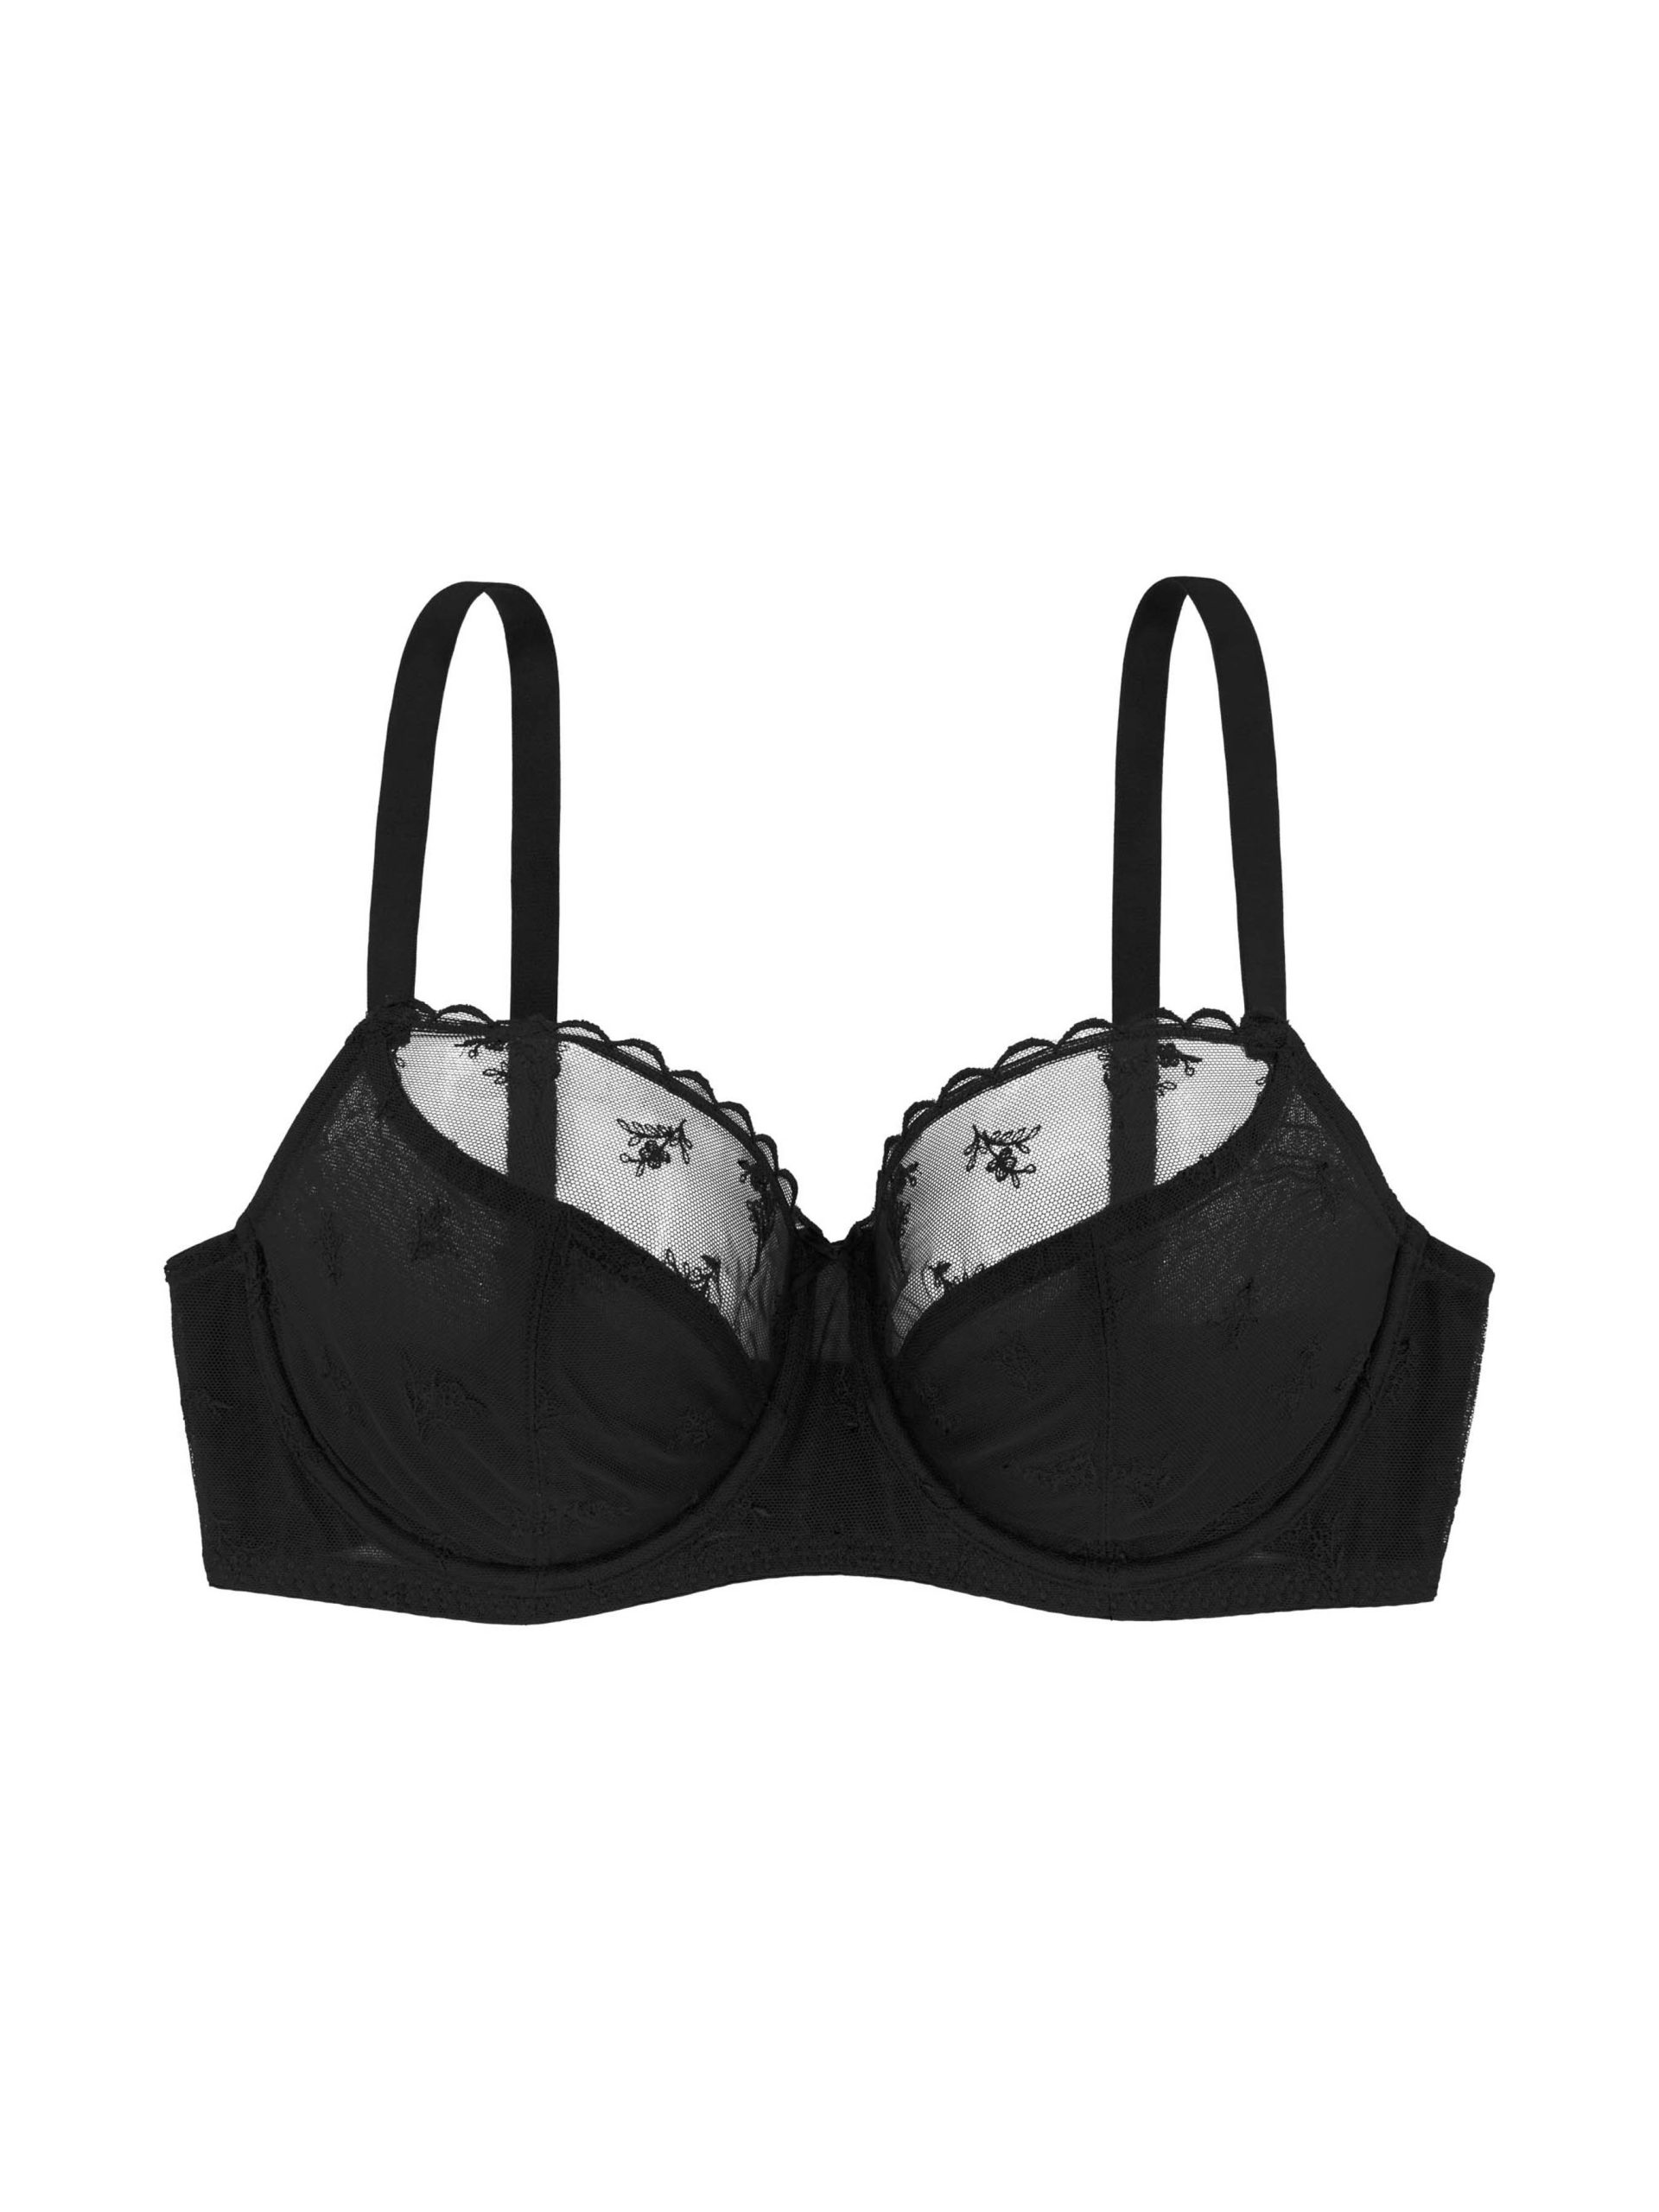 Buy online Black Solid Regular Bra from lingerie for Women by Elina for  ₹279 at 44% off